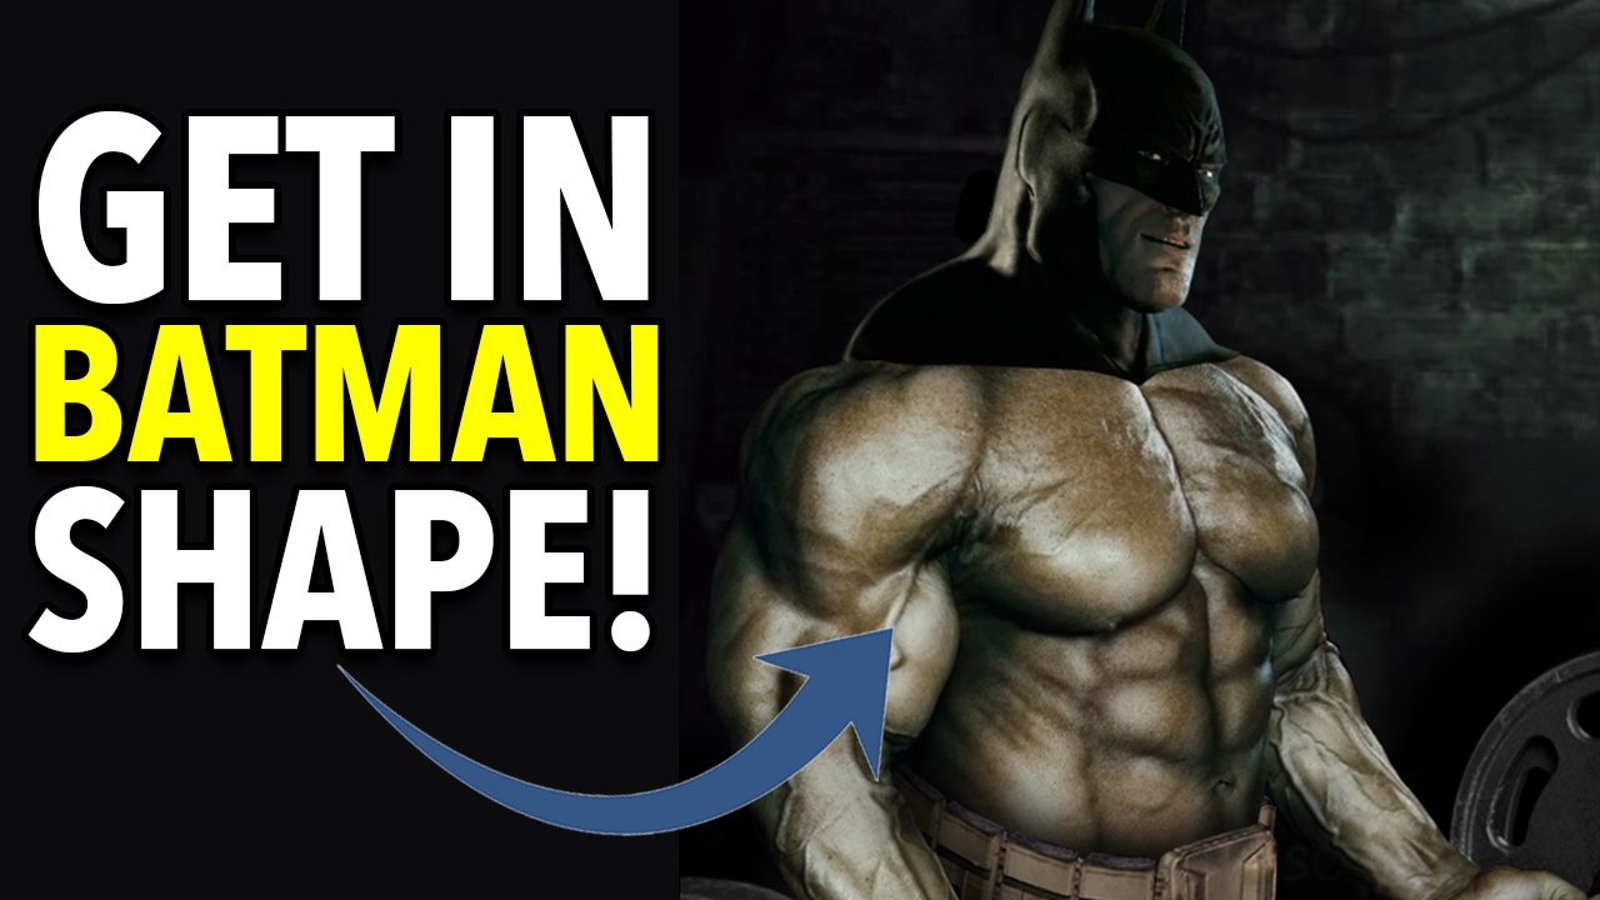 Gaming your physique - how to get a body like Batman, Kratos, or Nathan  Drake | VG247